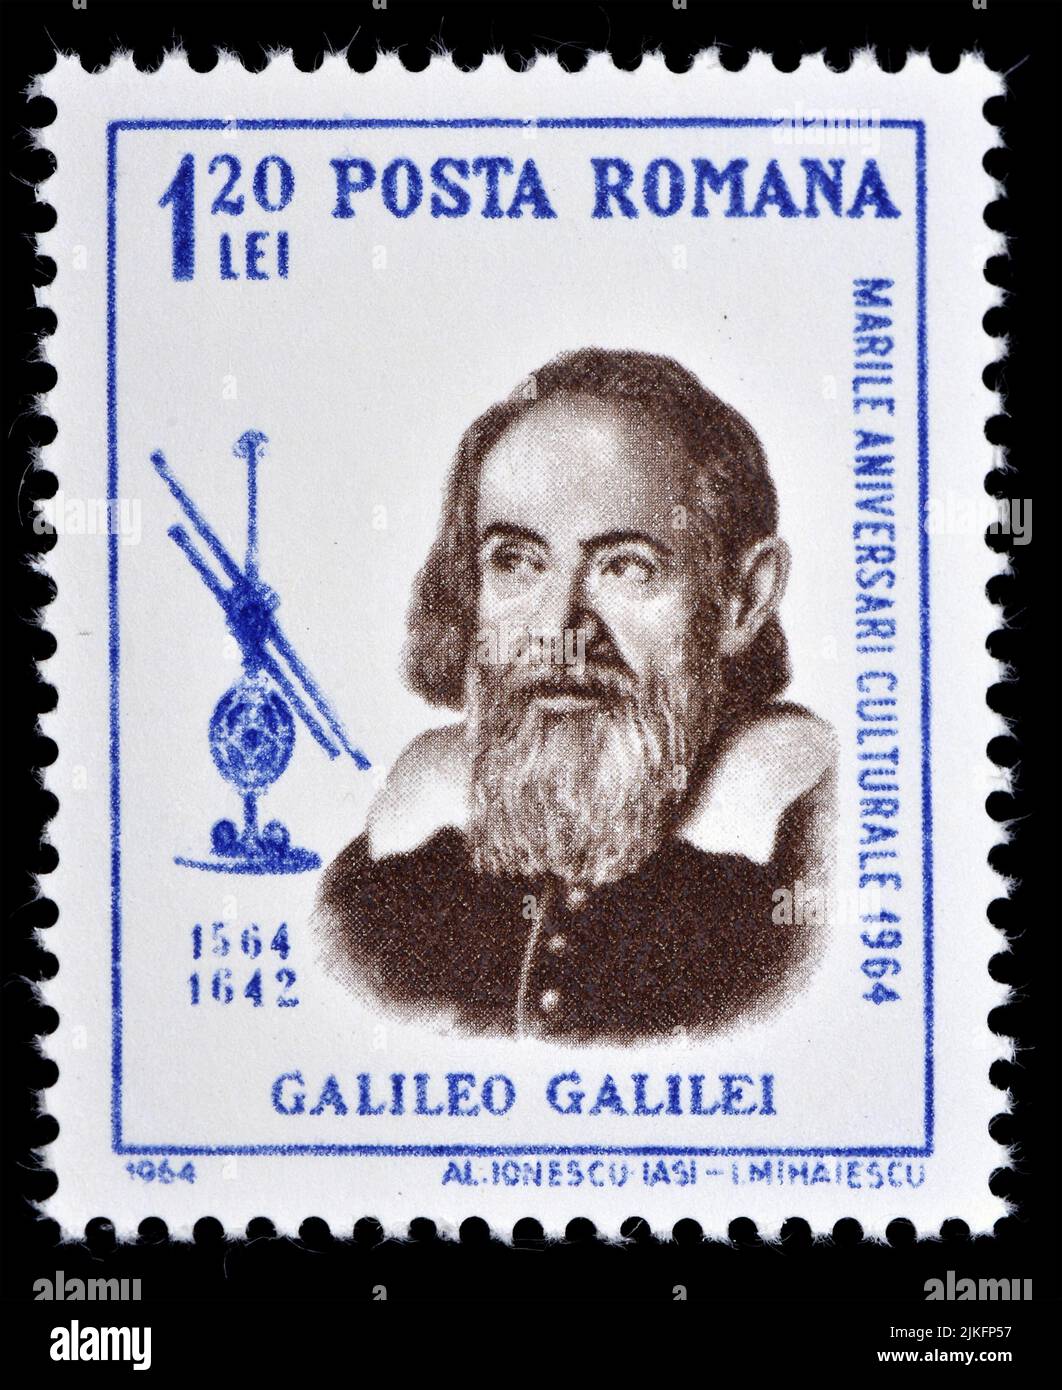 Timbre-poste roumain (1964) : Galileo Galilei (1564-1642), astronome italien Banque D'Images